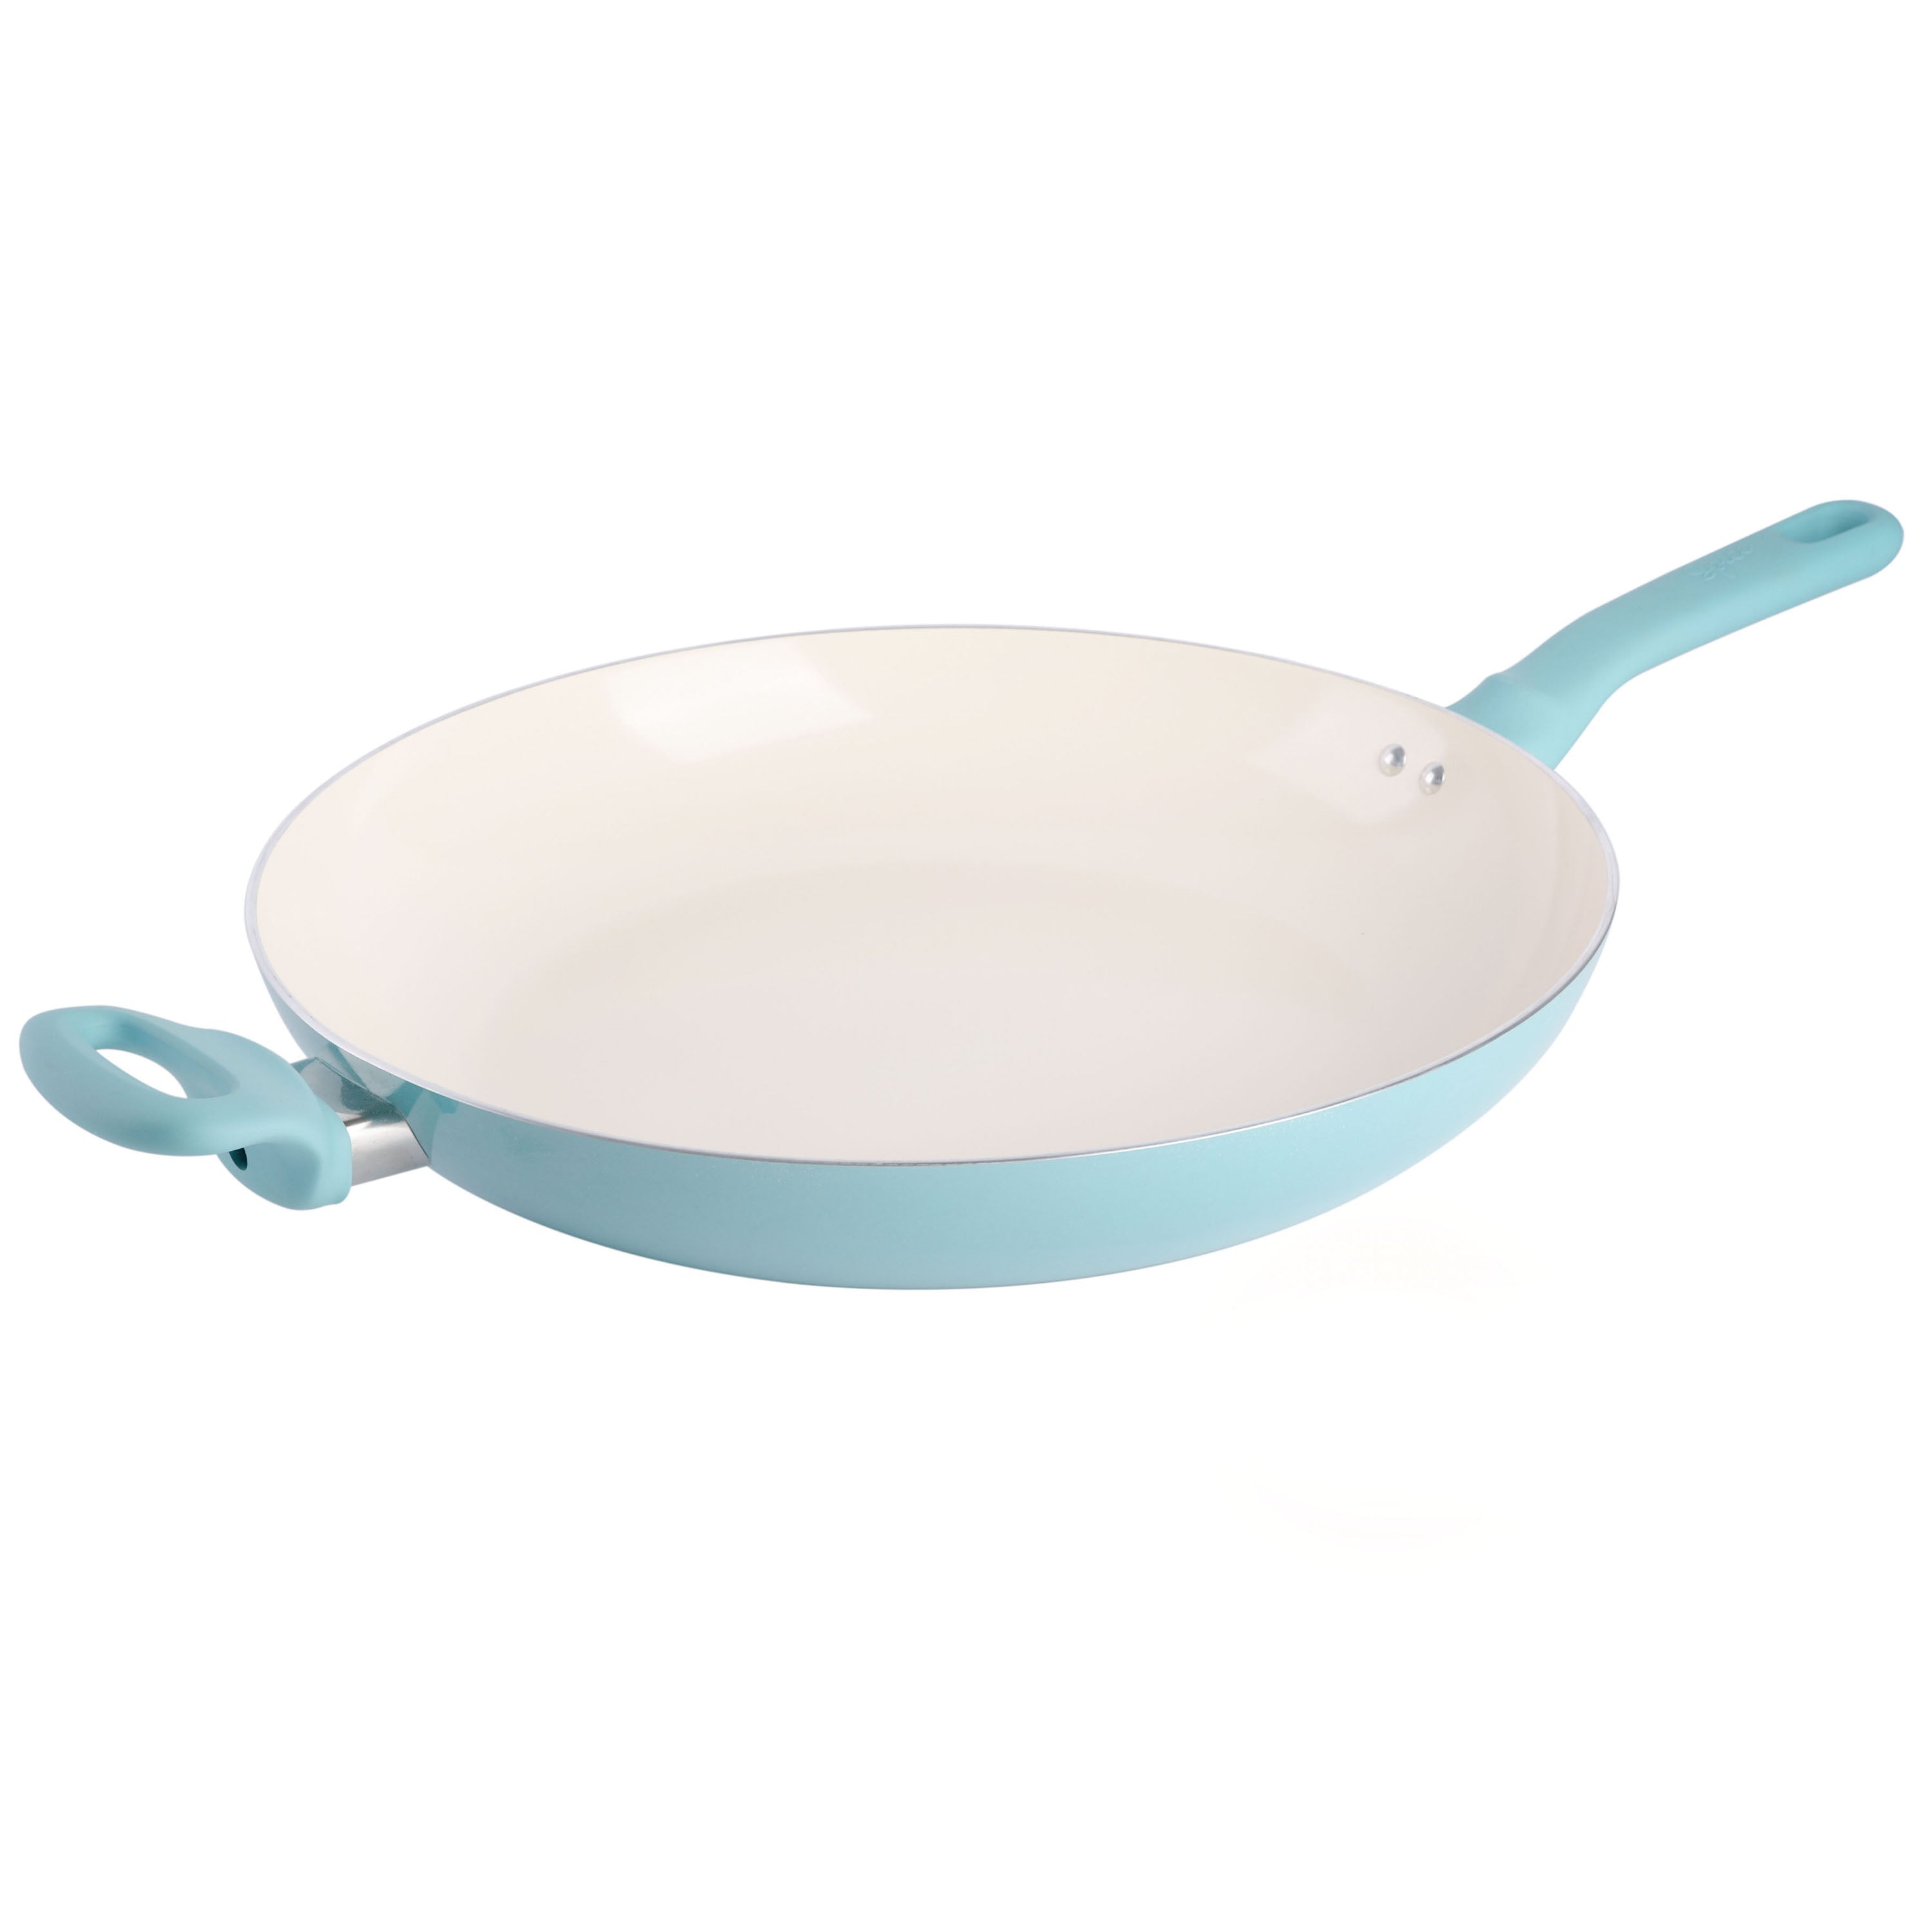 spice by tia mowry Spice by Tia Mowry Savory Saffron 2 Piece Ceramic  Nonstick Aluminum Frying Pan Set in Mint